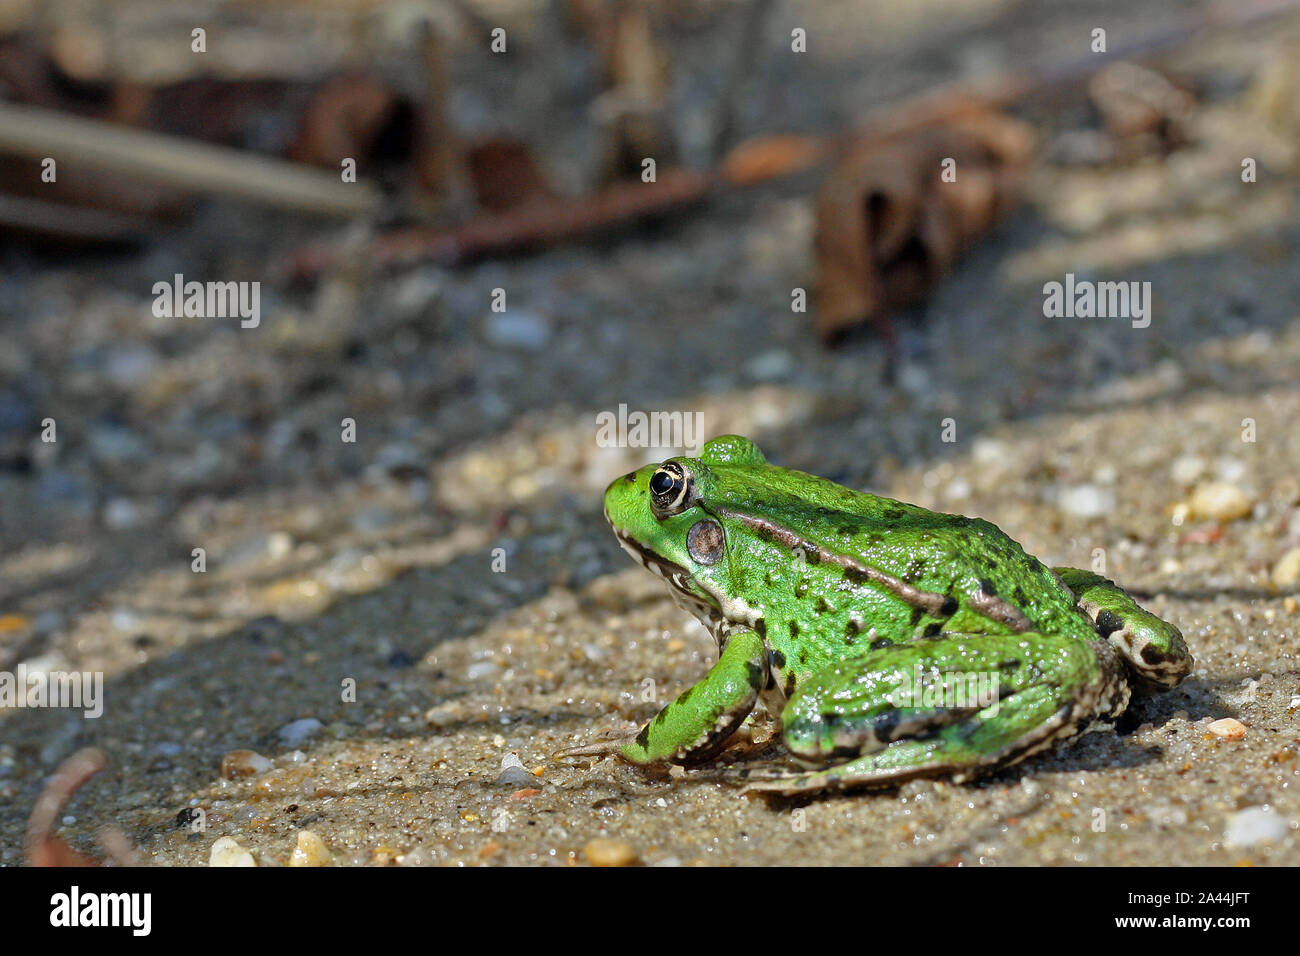 green frog on sandy ground near the water, copy space Stock Photo